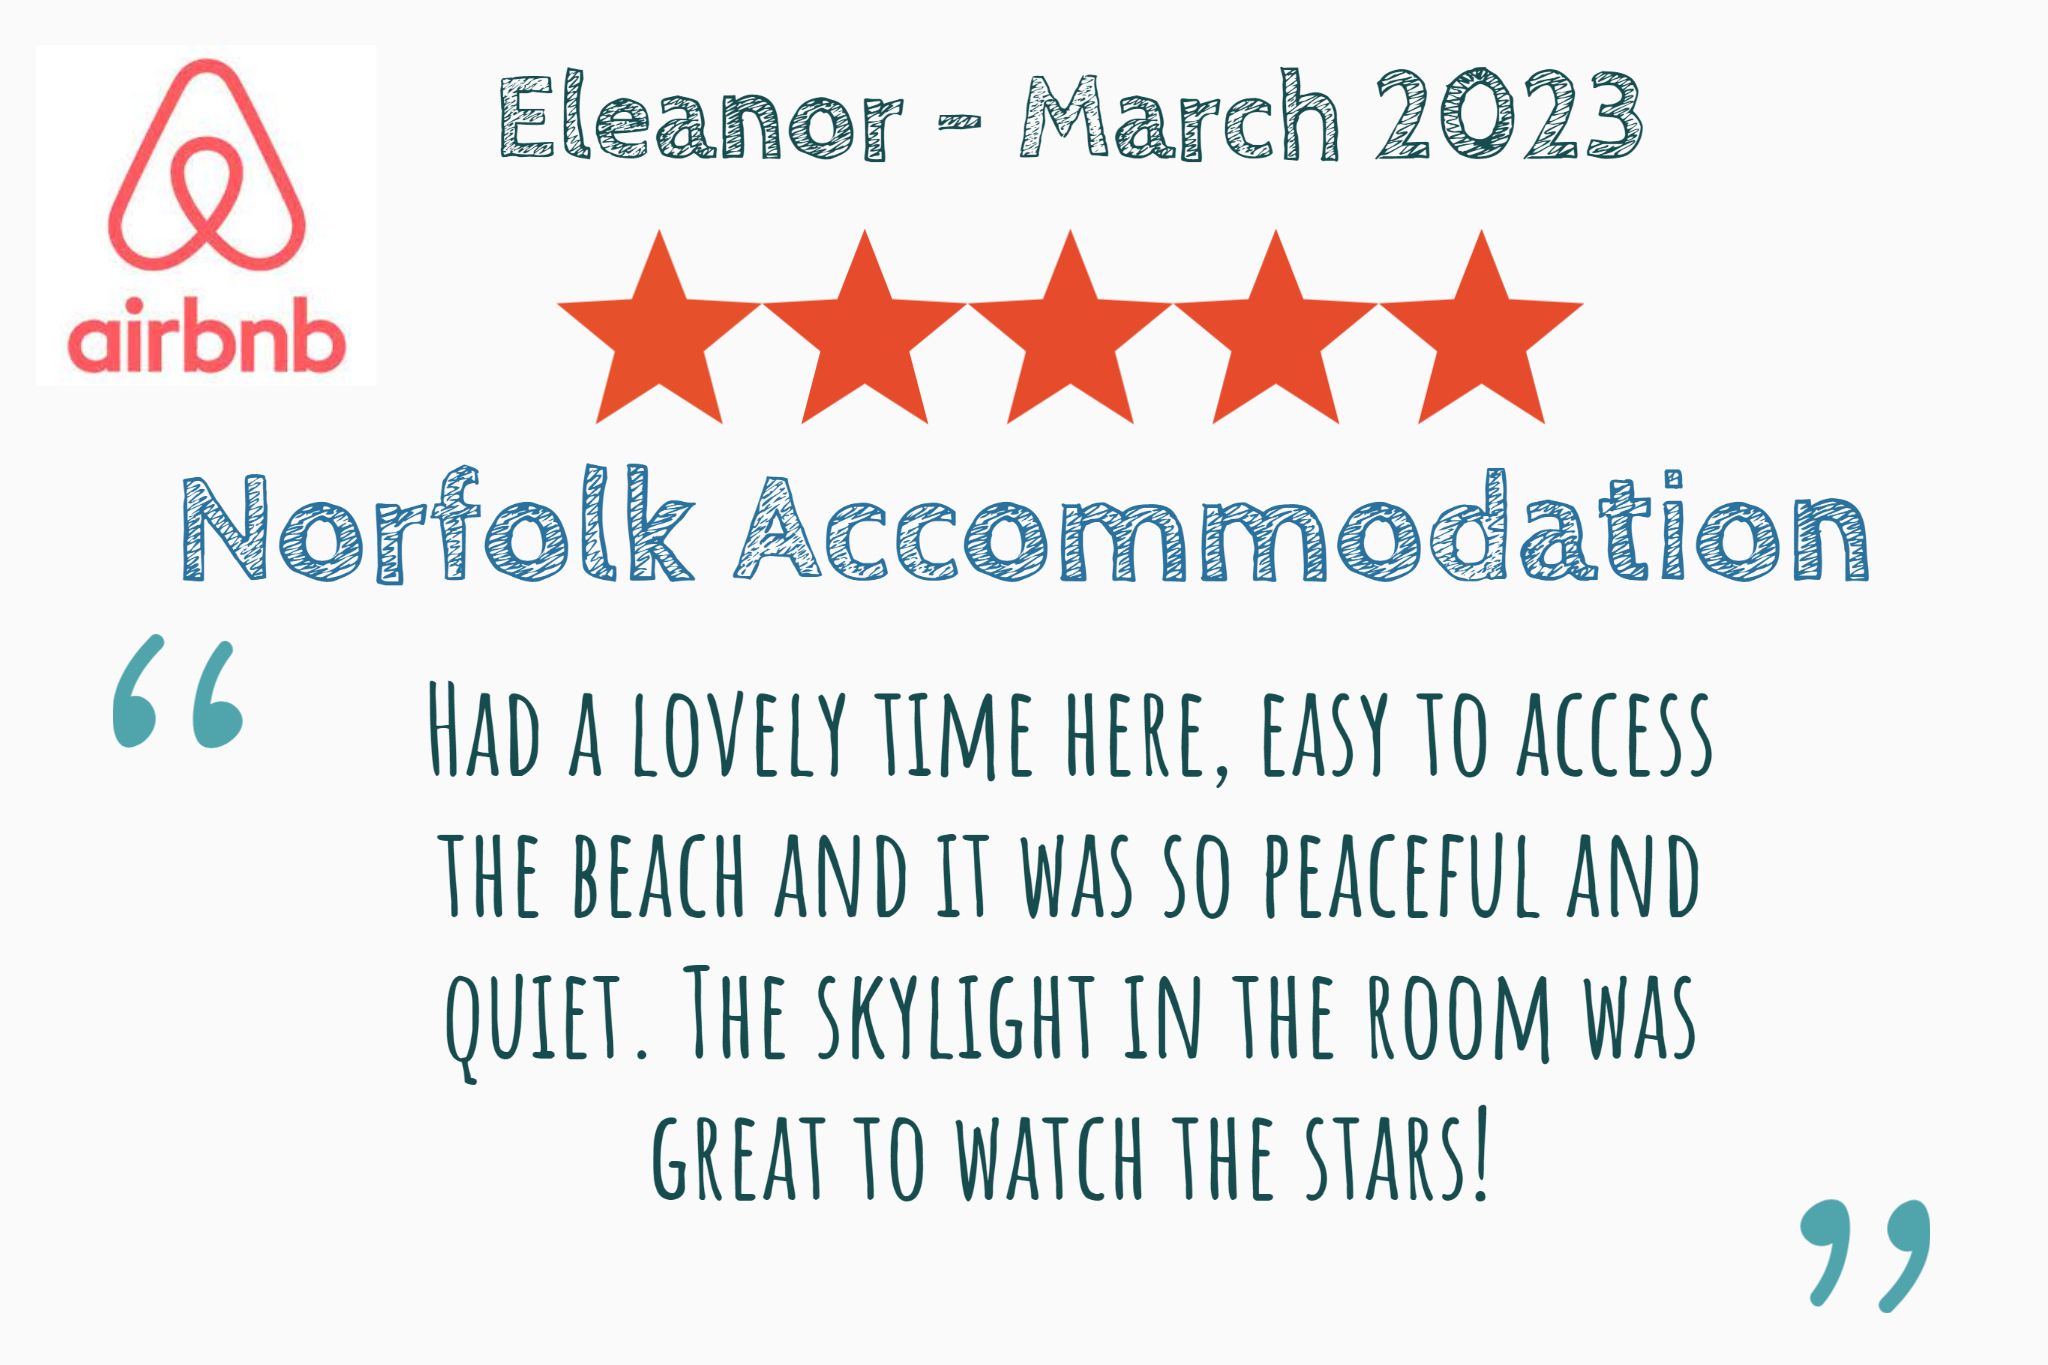 Eleanor's airbnb review of our chalets with skylights for stargazing